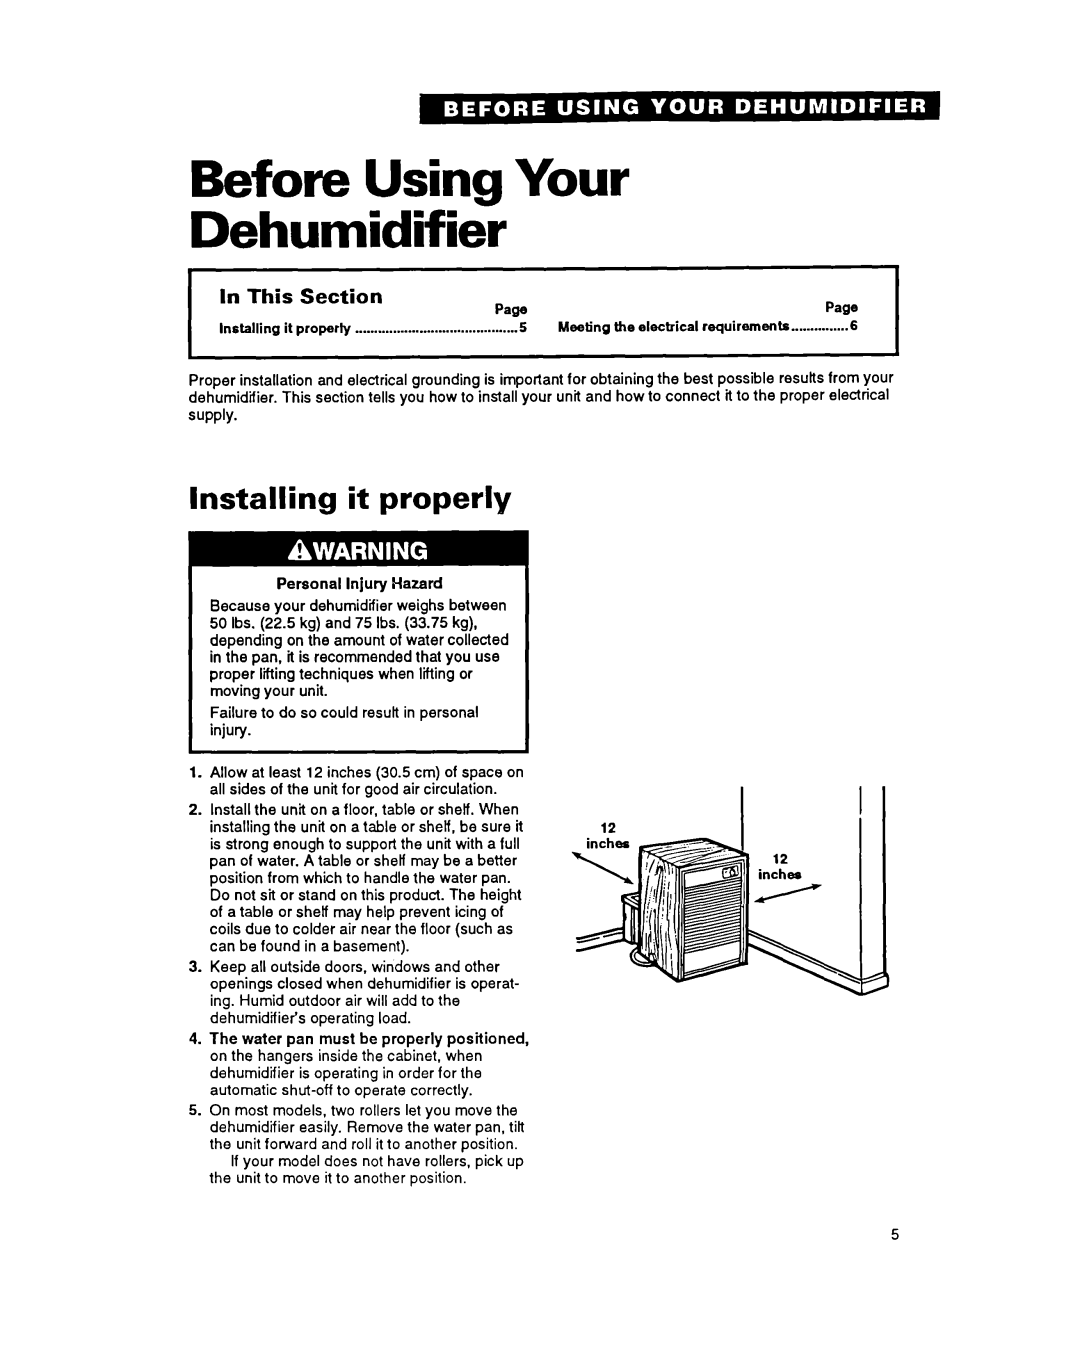 Whirlpool ADO40, ADO15 warranty Before Using Your Dehumidifier, Installing it properly, In This Section PagePaw 